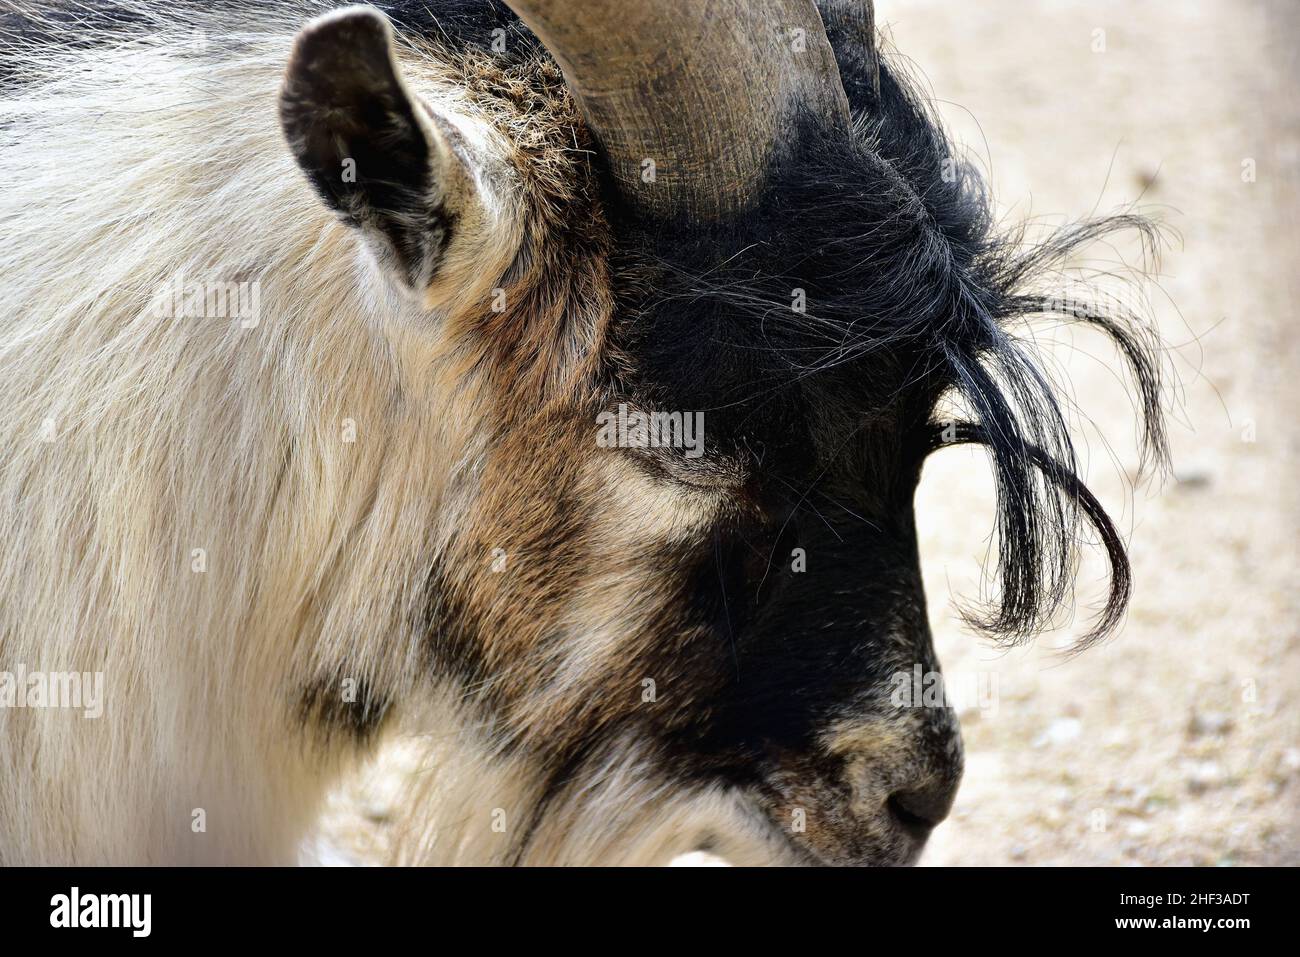 Black, White, Brown Goat Head with Long Facial Hair and Horns Stock Photo